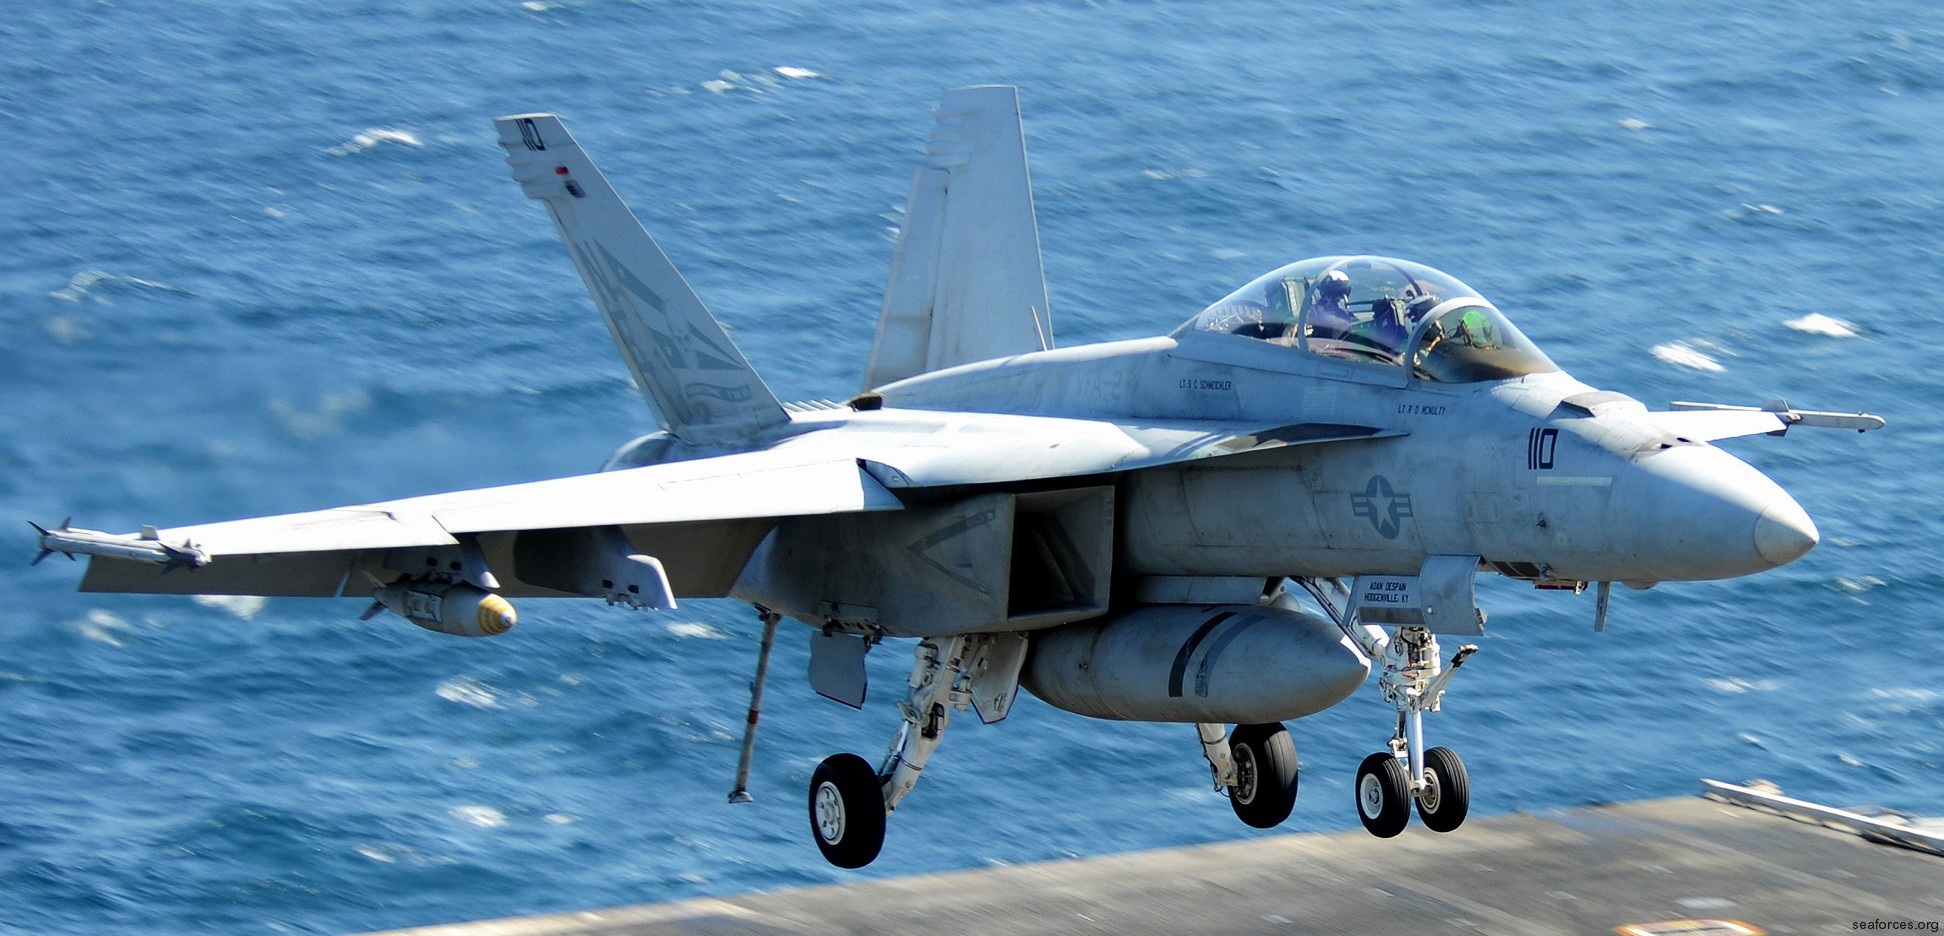 vfa-2 bounty hunters strike fighter squadron us navy f/a-18f super hornet carrier air wing cvw-2 uss abraham lincoln cvn-72 40